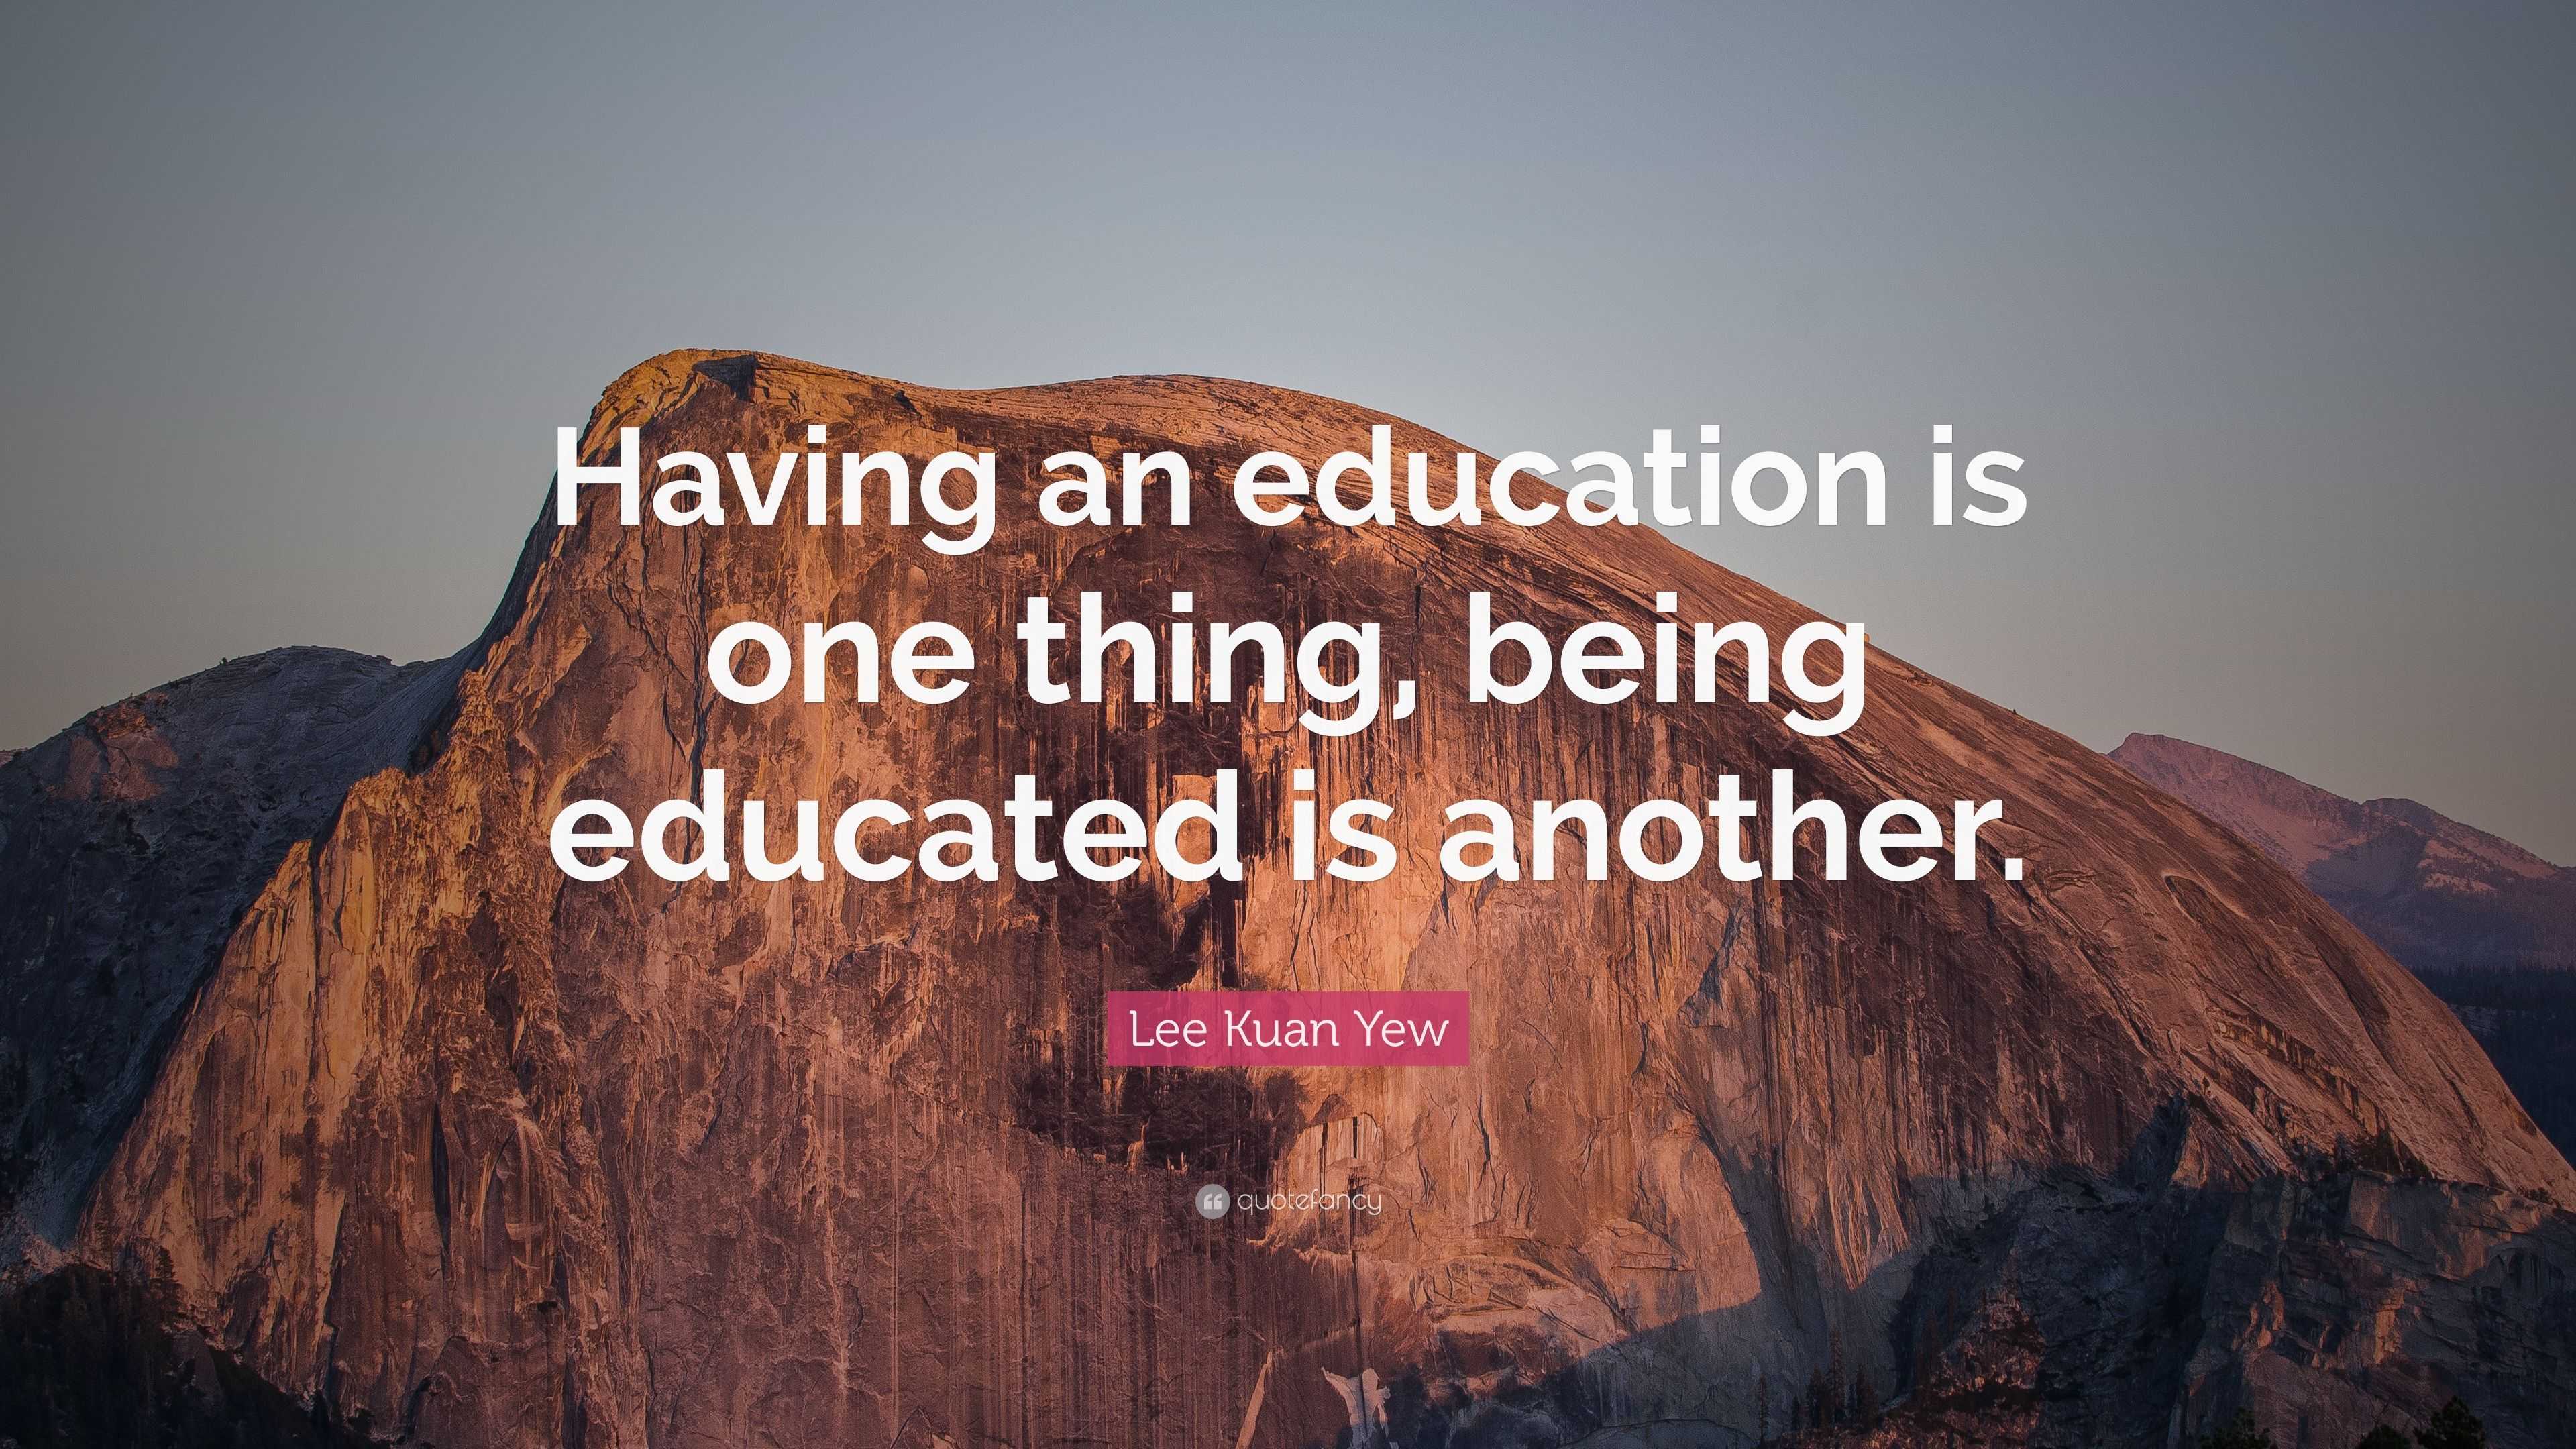 Lee Kuan Yew Quote: “Having an education is one thing, being educated ...